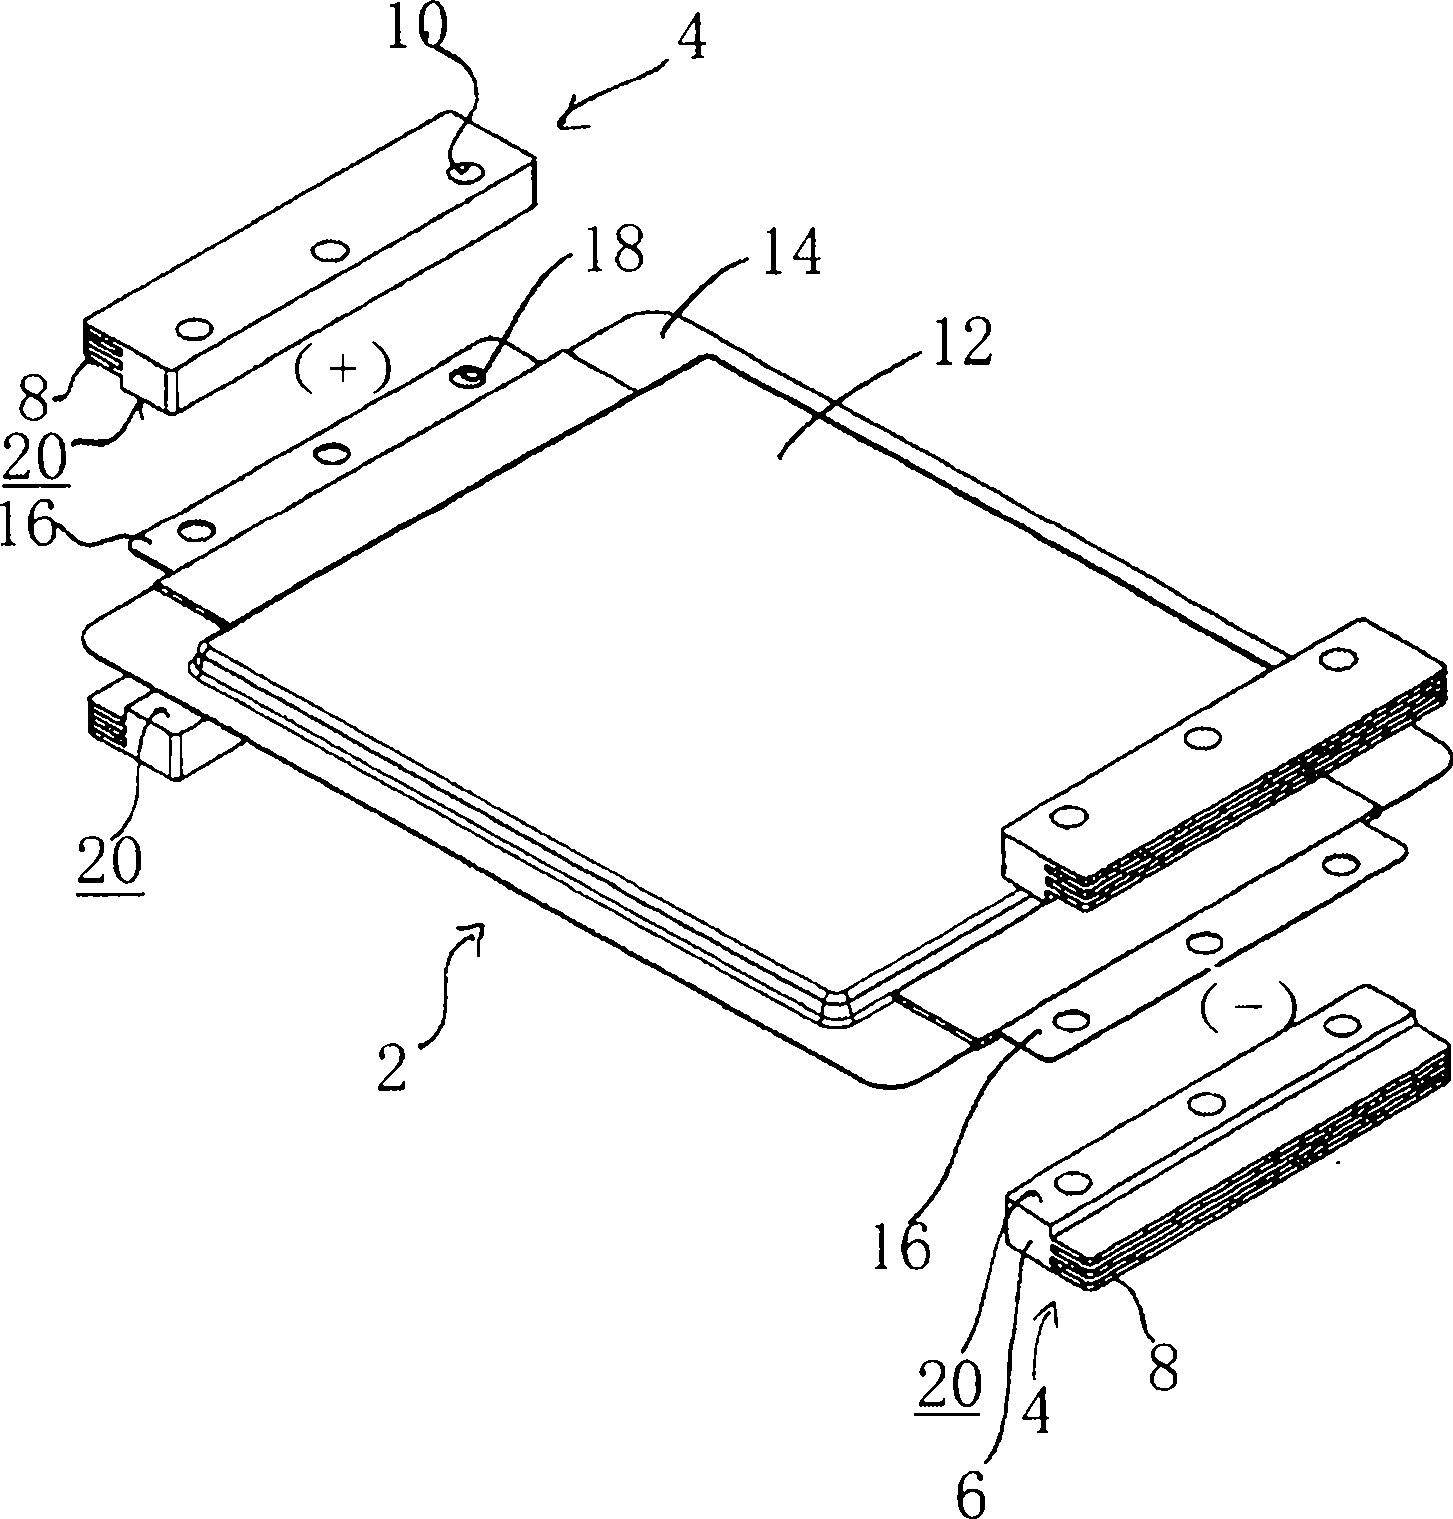 Electrical energy storage device having flat cells and heat sinks